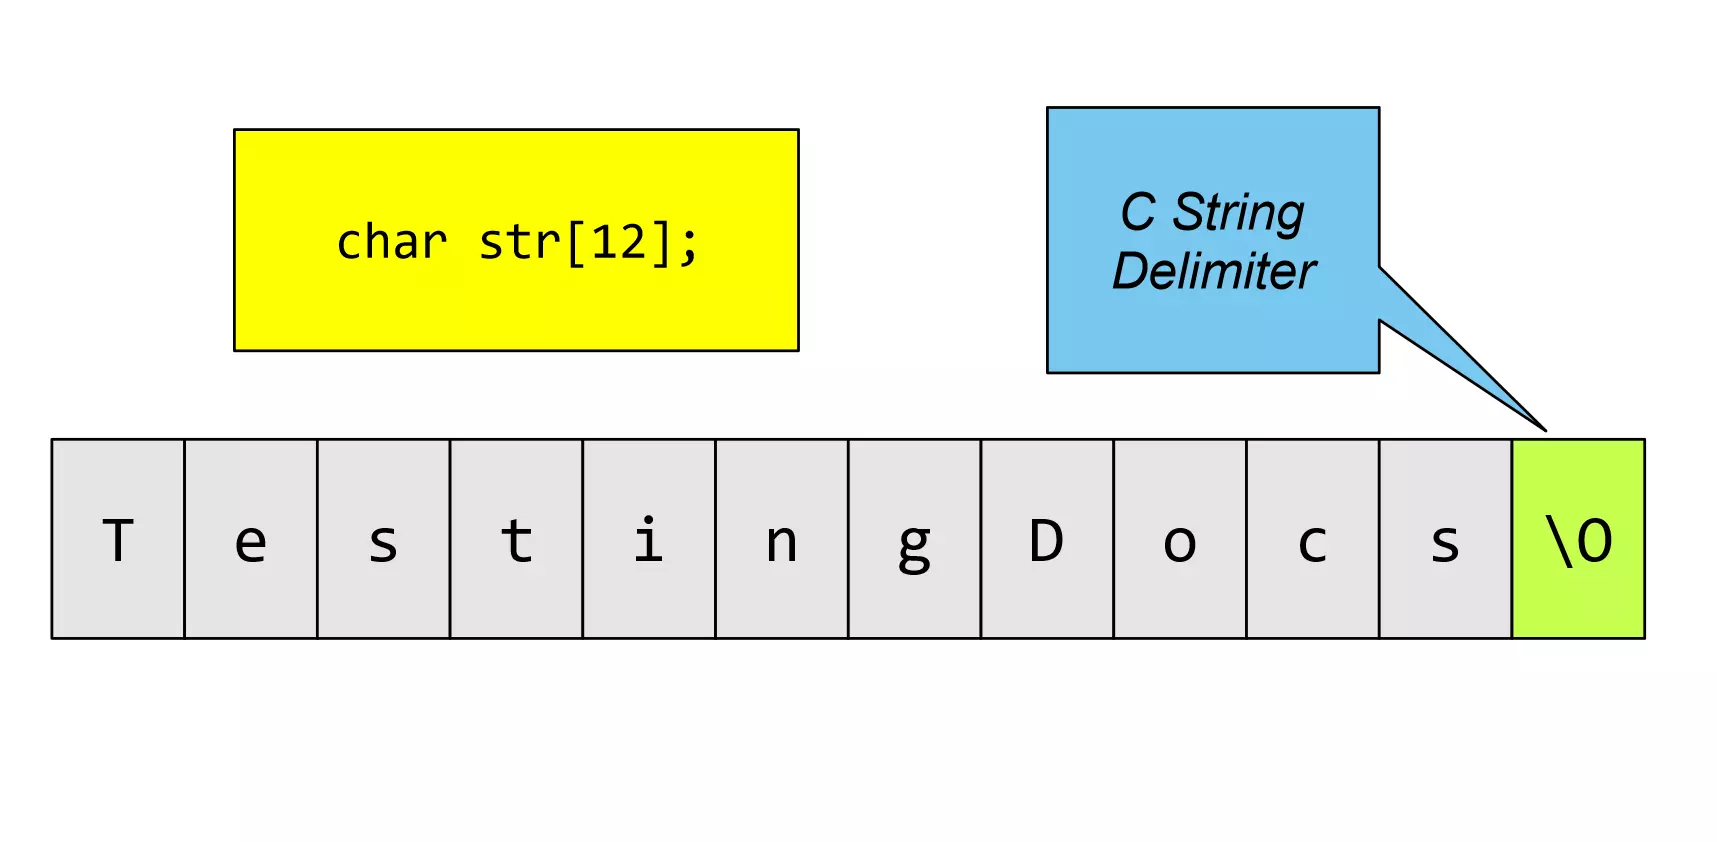 C String Array of Characters